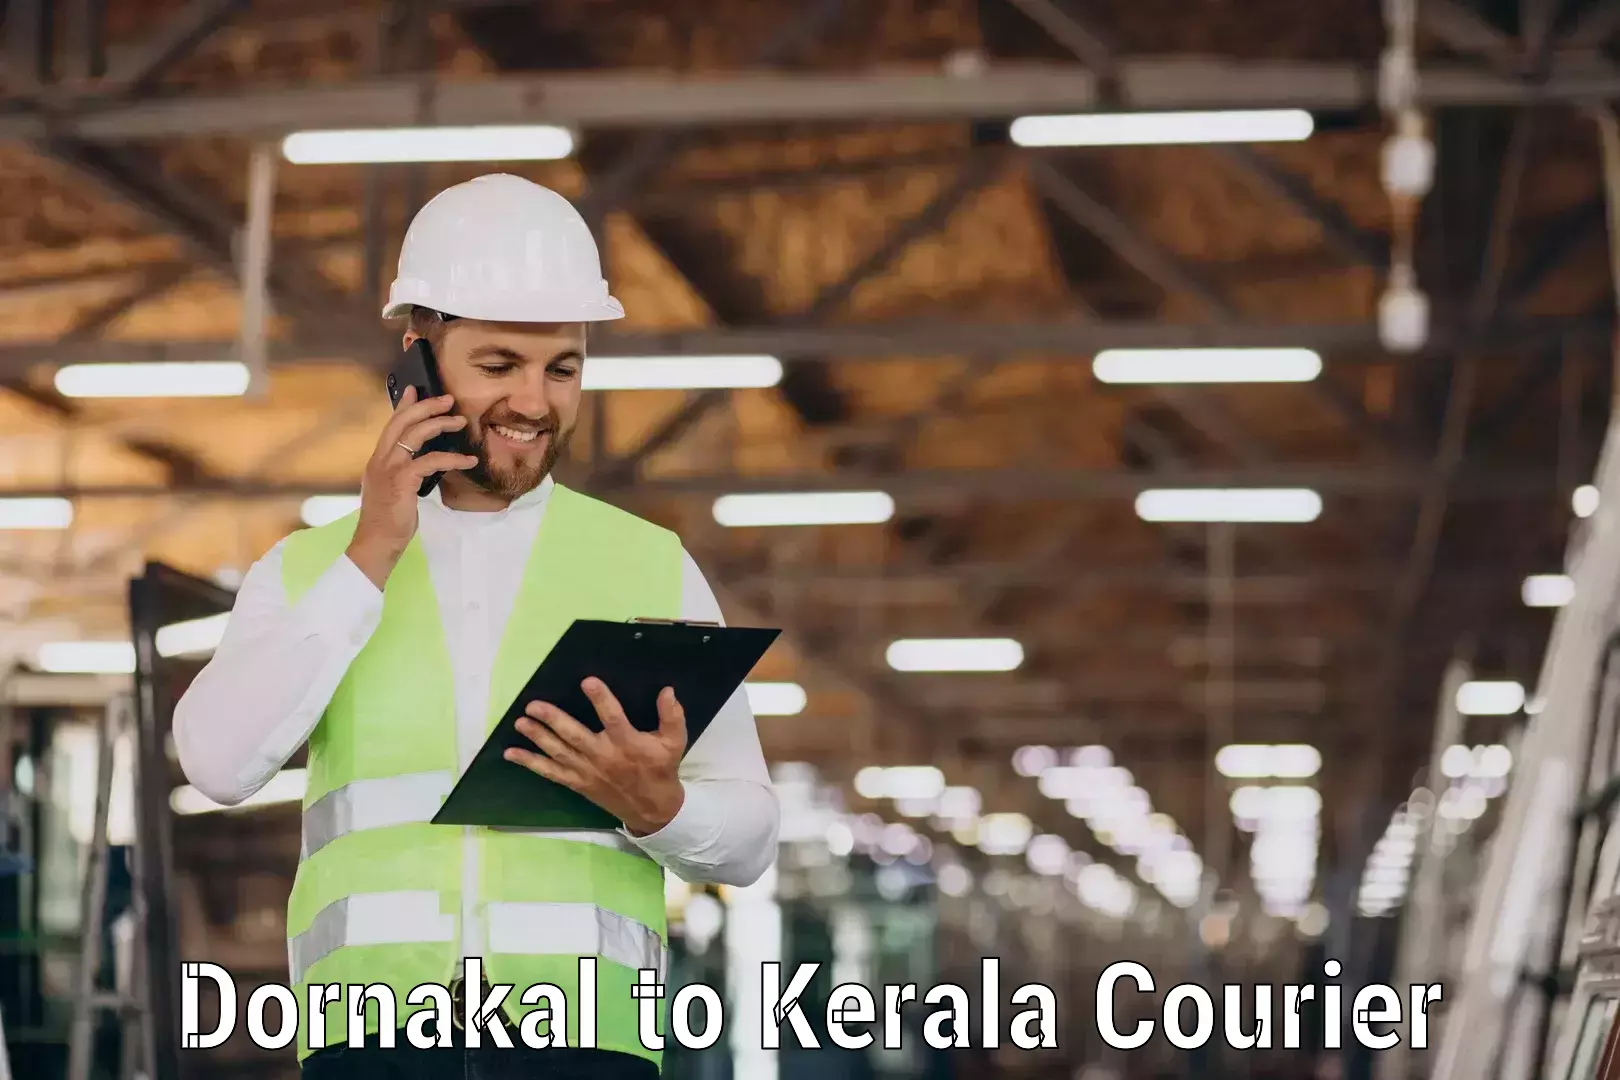 Flexible delivery scheduling Dornakal to Kannur